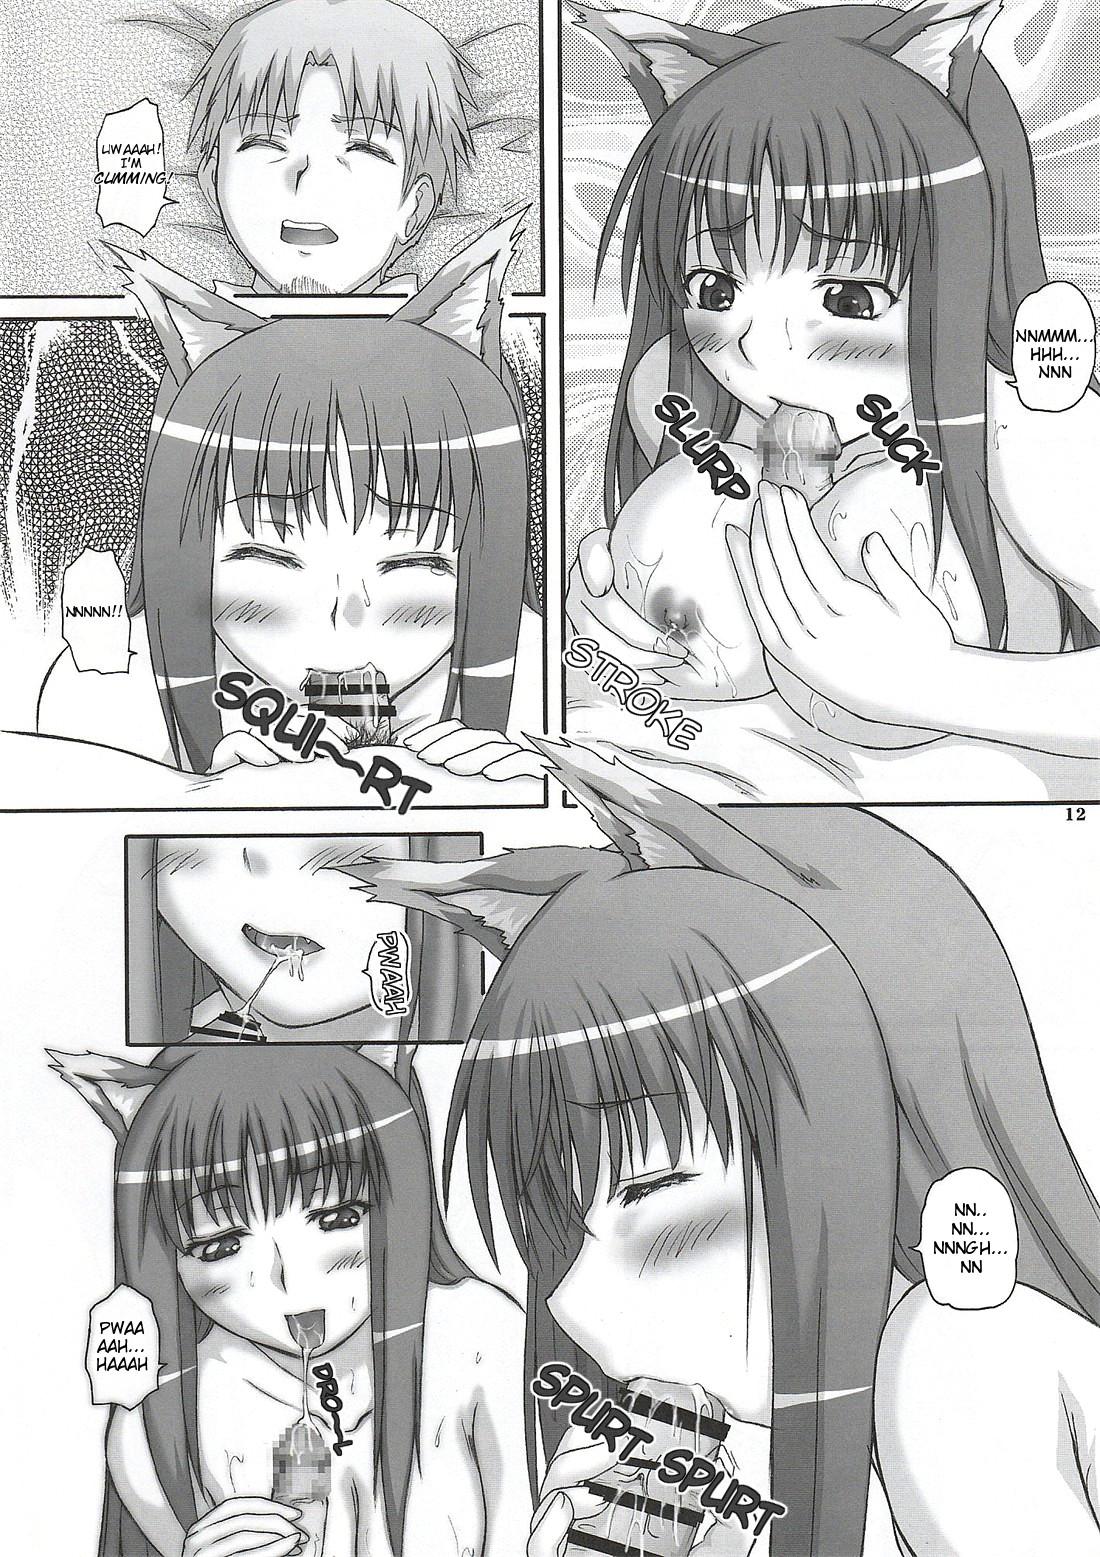 Women 2Stroke TY - Spice and wolf Teamskeet - Page 11